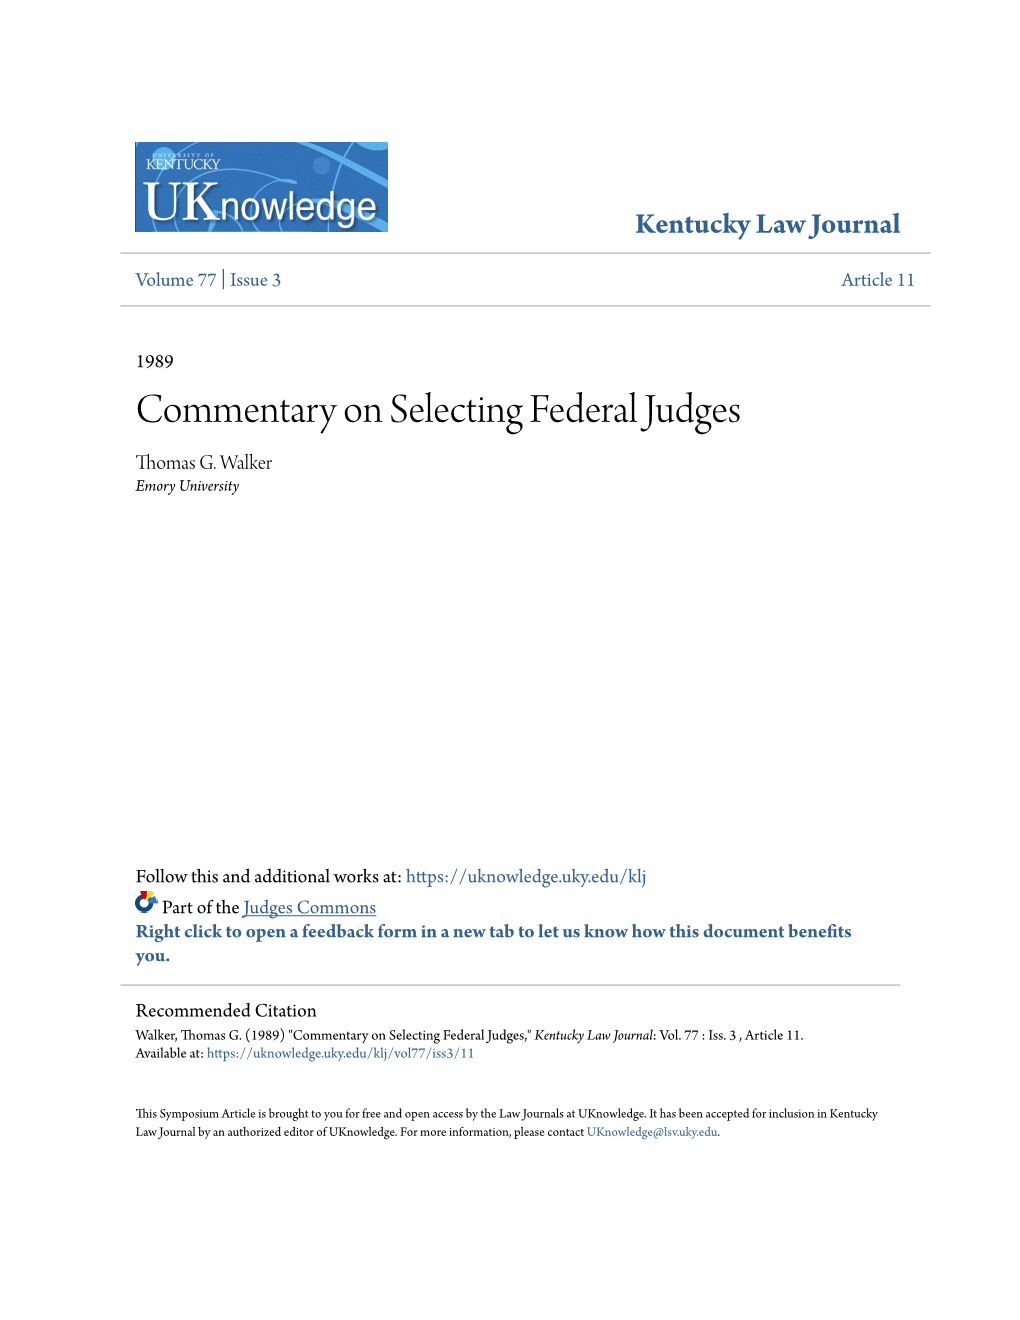 Commentary on Selecting Federal Judges Thomas G